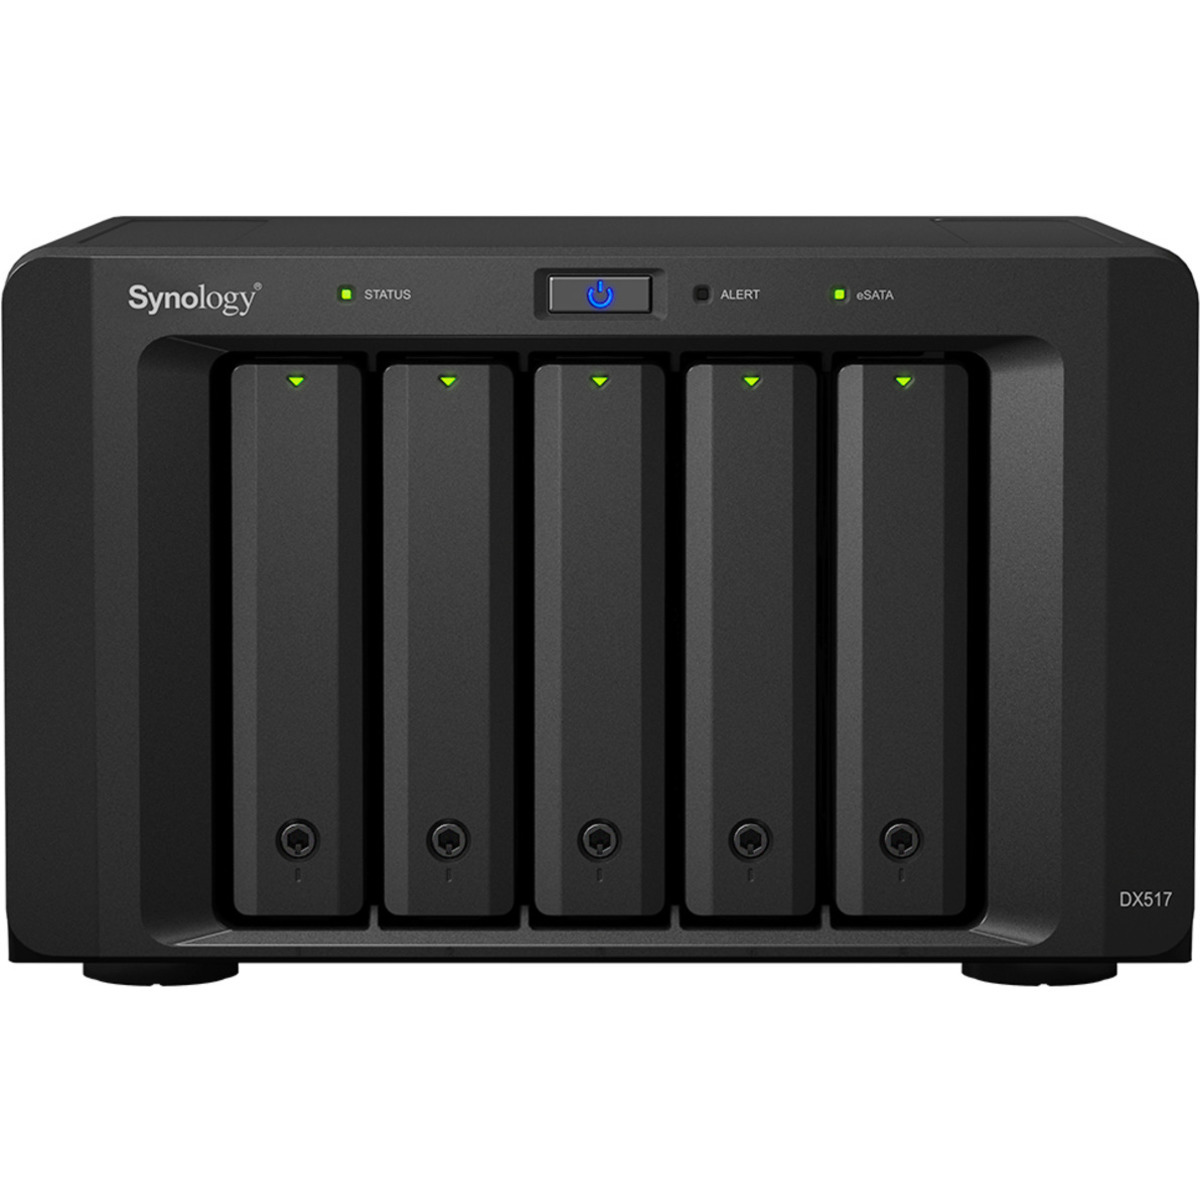 Synology DX517 External Expansion Drive 42tb 5-Bay Desktop Multimedia / Power User / Business Expansion Enclosure 3x14tb Western Digital Ultrastar DC HC530 WUH721414ALE6L4 3.5 7200rpm SATA 6Gb/s HDD ENTERPRISE Class Drives Installed - Burn-In Tested DX517 External Expansion Drive